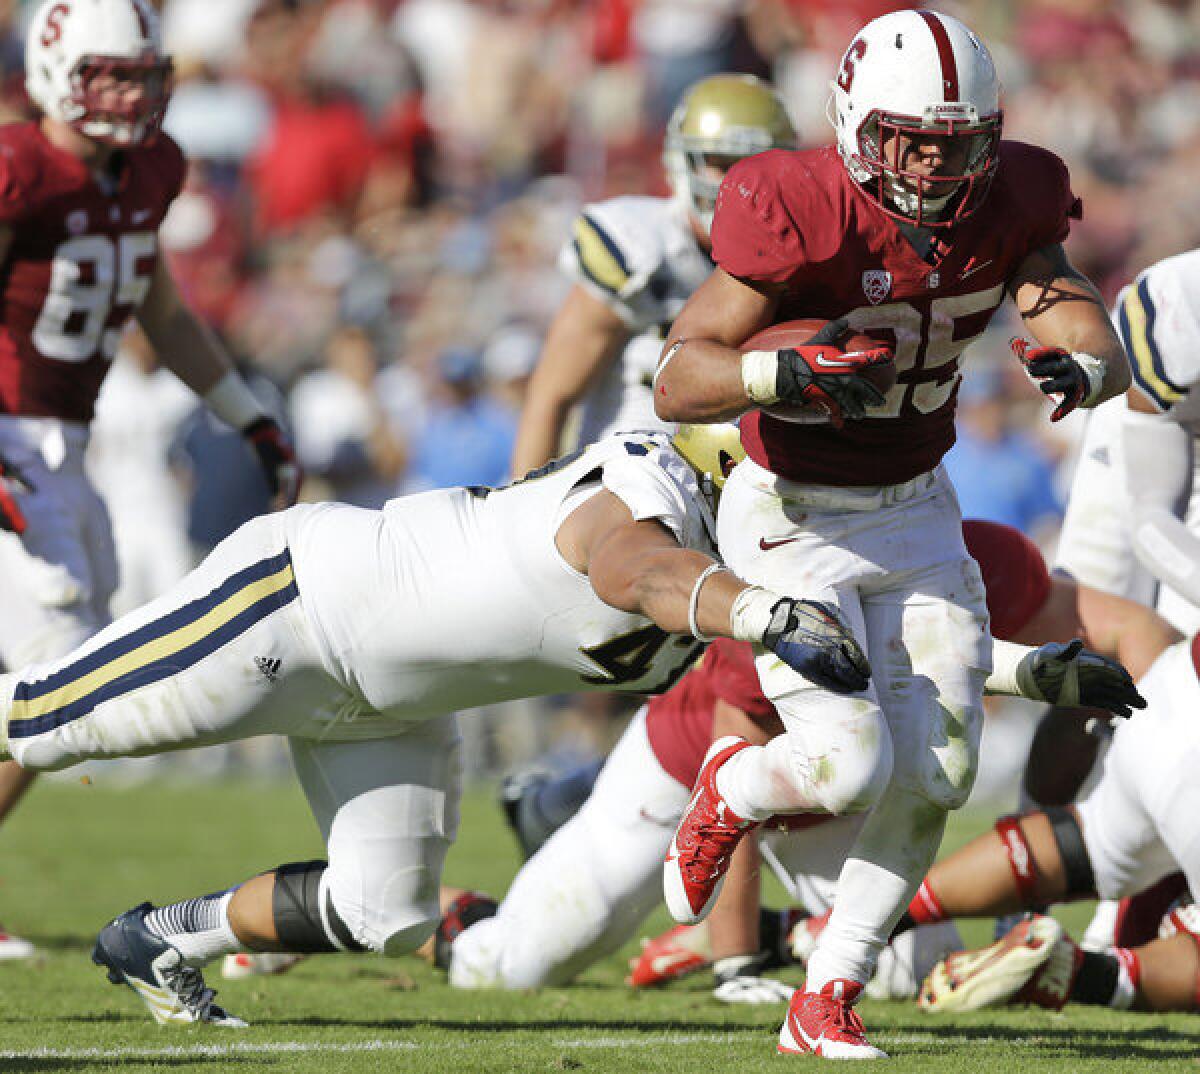 Stanford running back Tyler Gaffney runs against UCLA during the second half of an NCAA college football game. Stanford won 24-10.